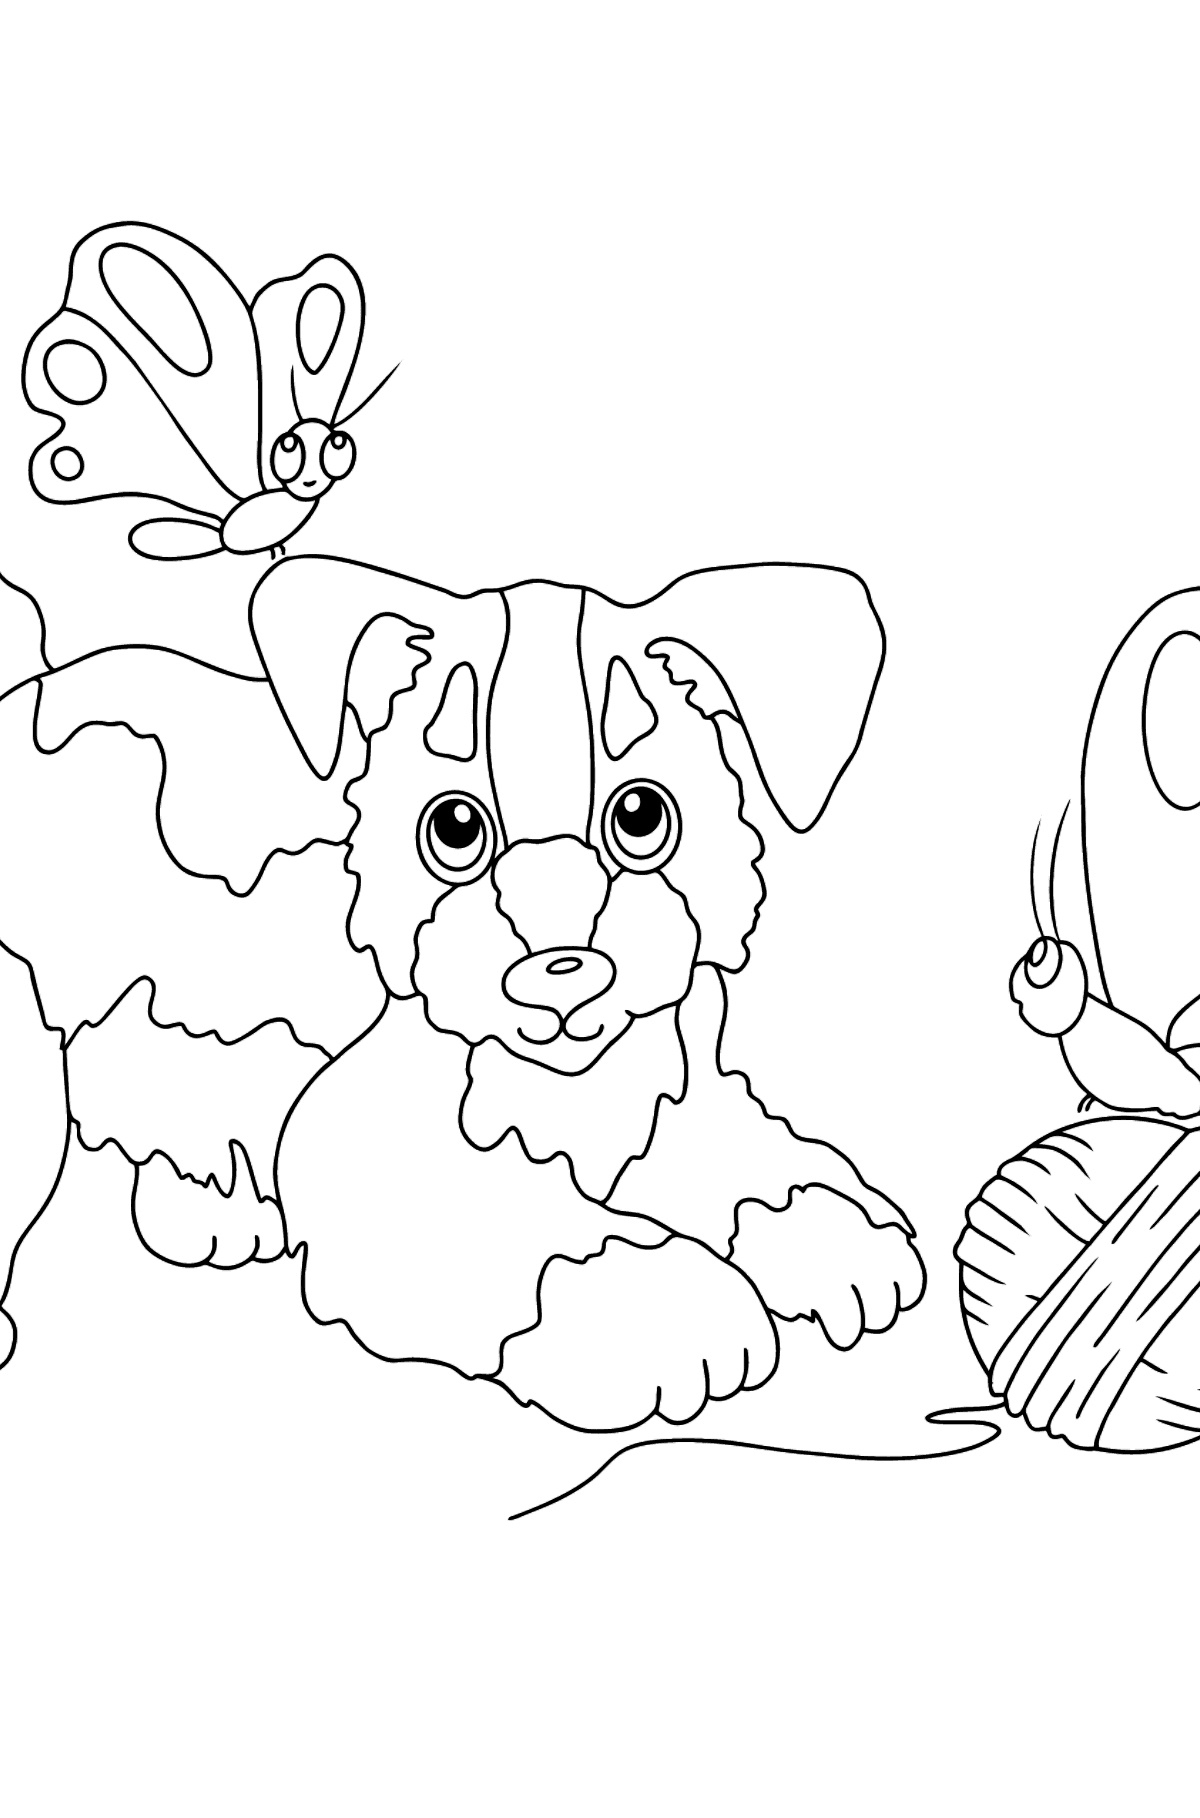 Coloring Page - A Dog is Playing with a Ball of Yarn and Butterflies - Coloring Pages for Kids